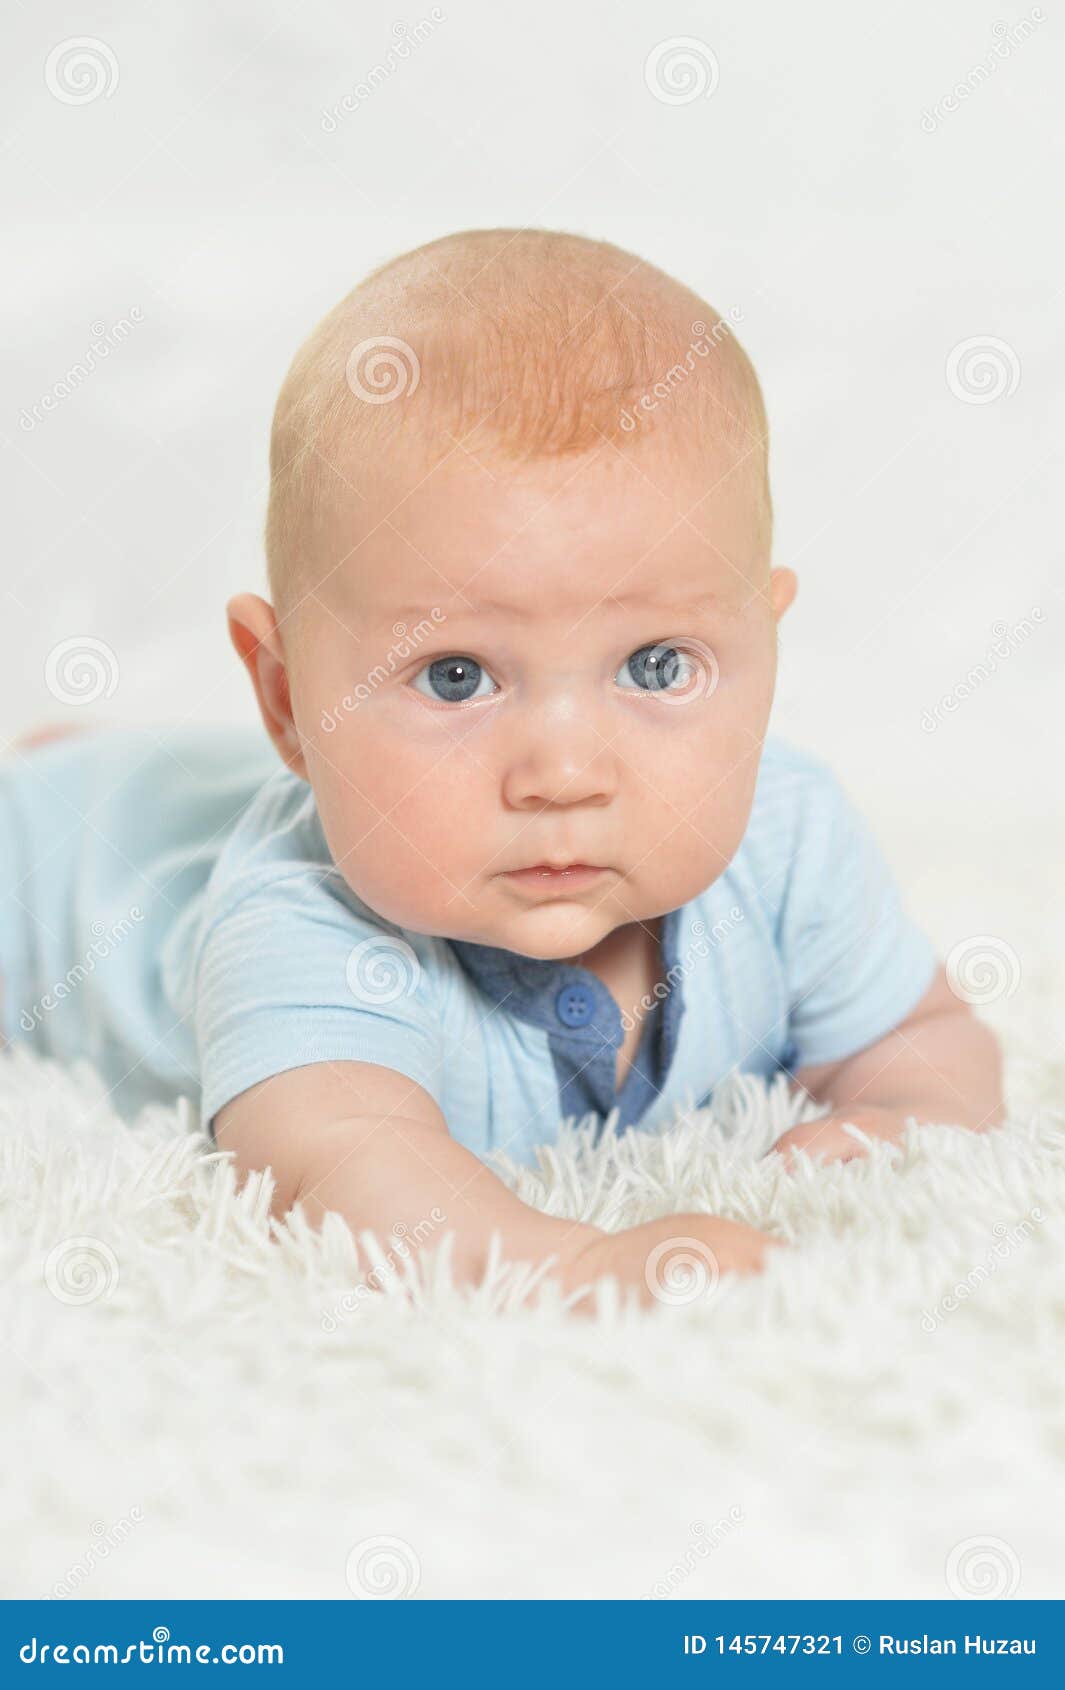 Portrait of Beautiful Baby Boy on Bed Stock Image - Image of beauty ...